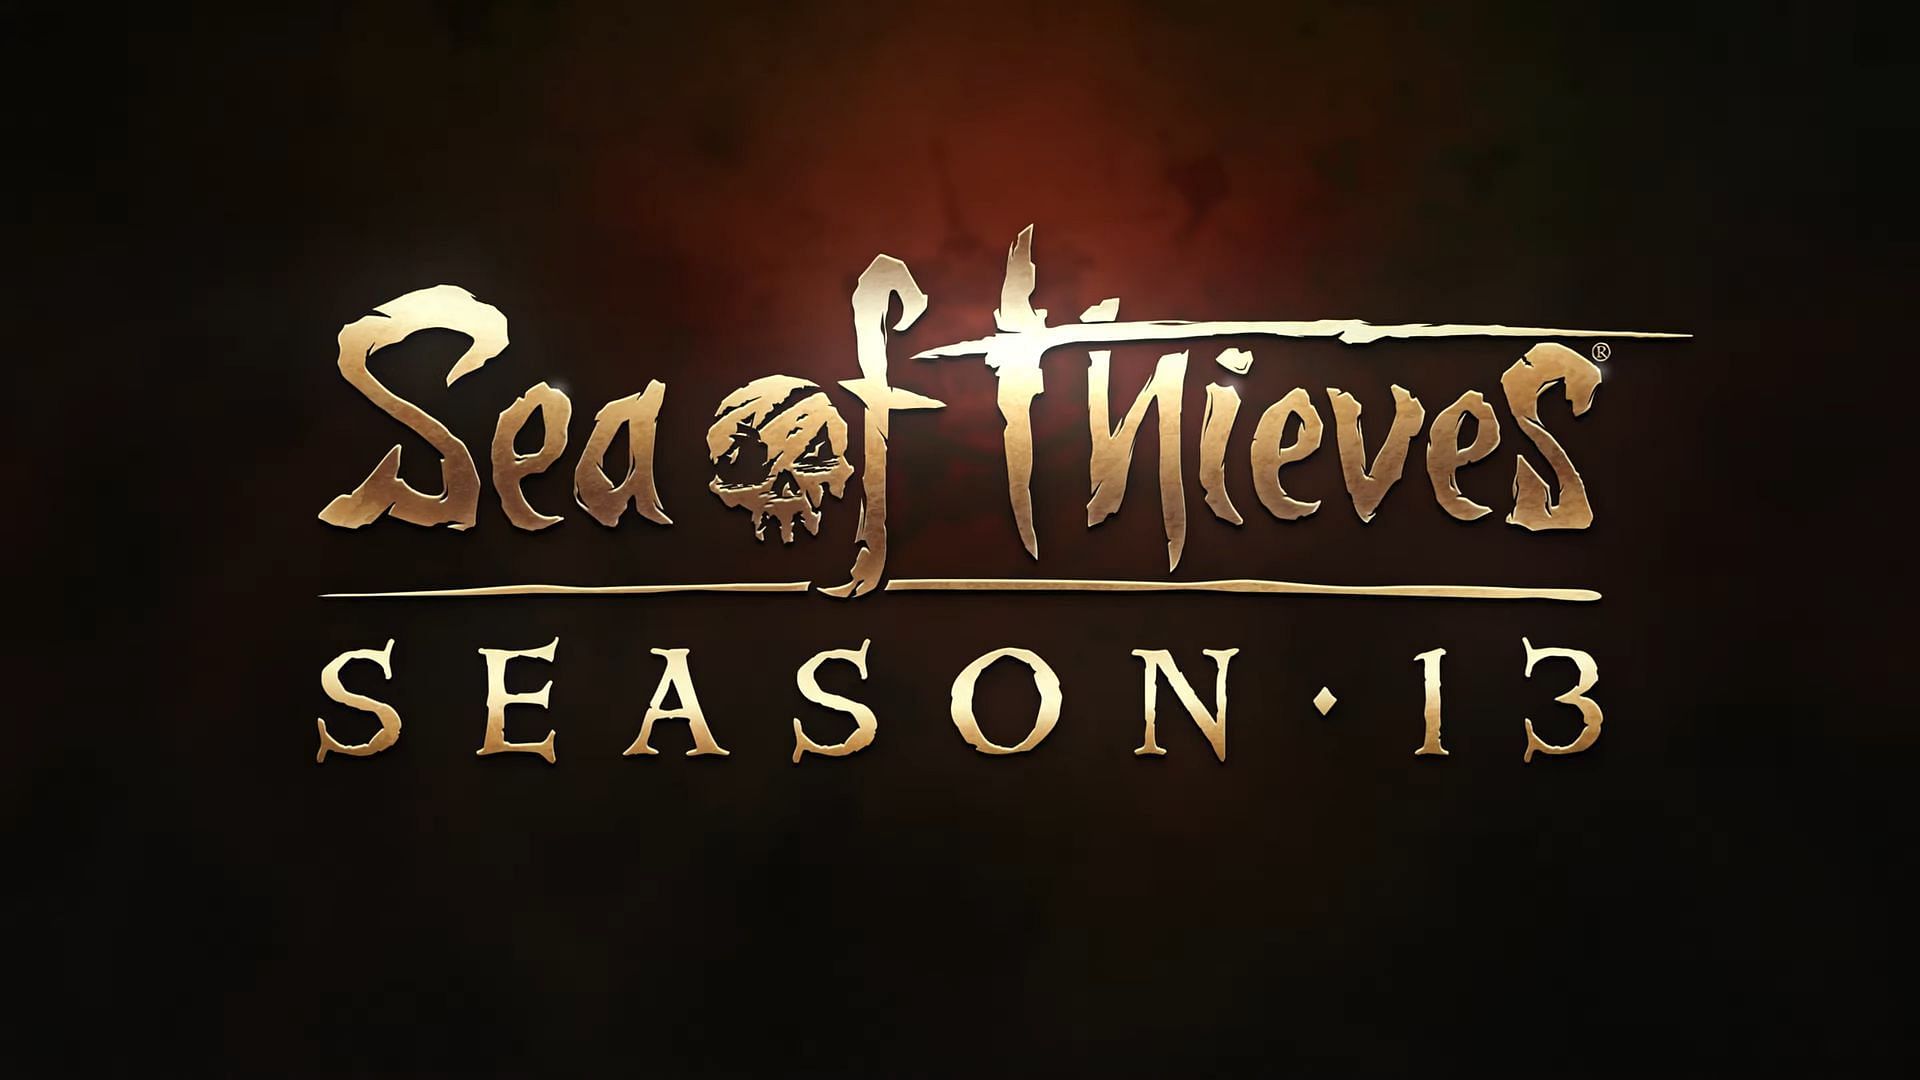 Sea of Thieves 2024 Preview Event revealed details for Season 13.